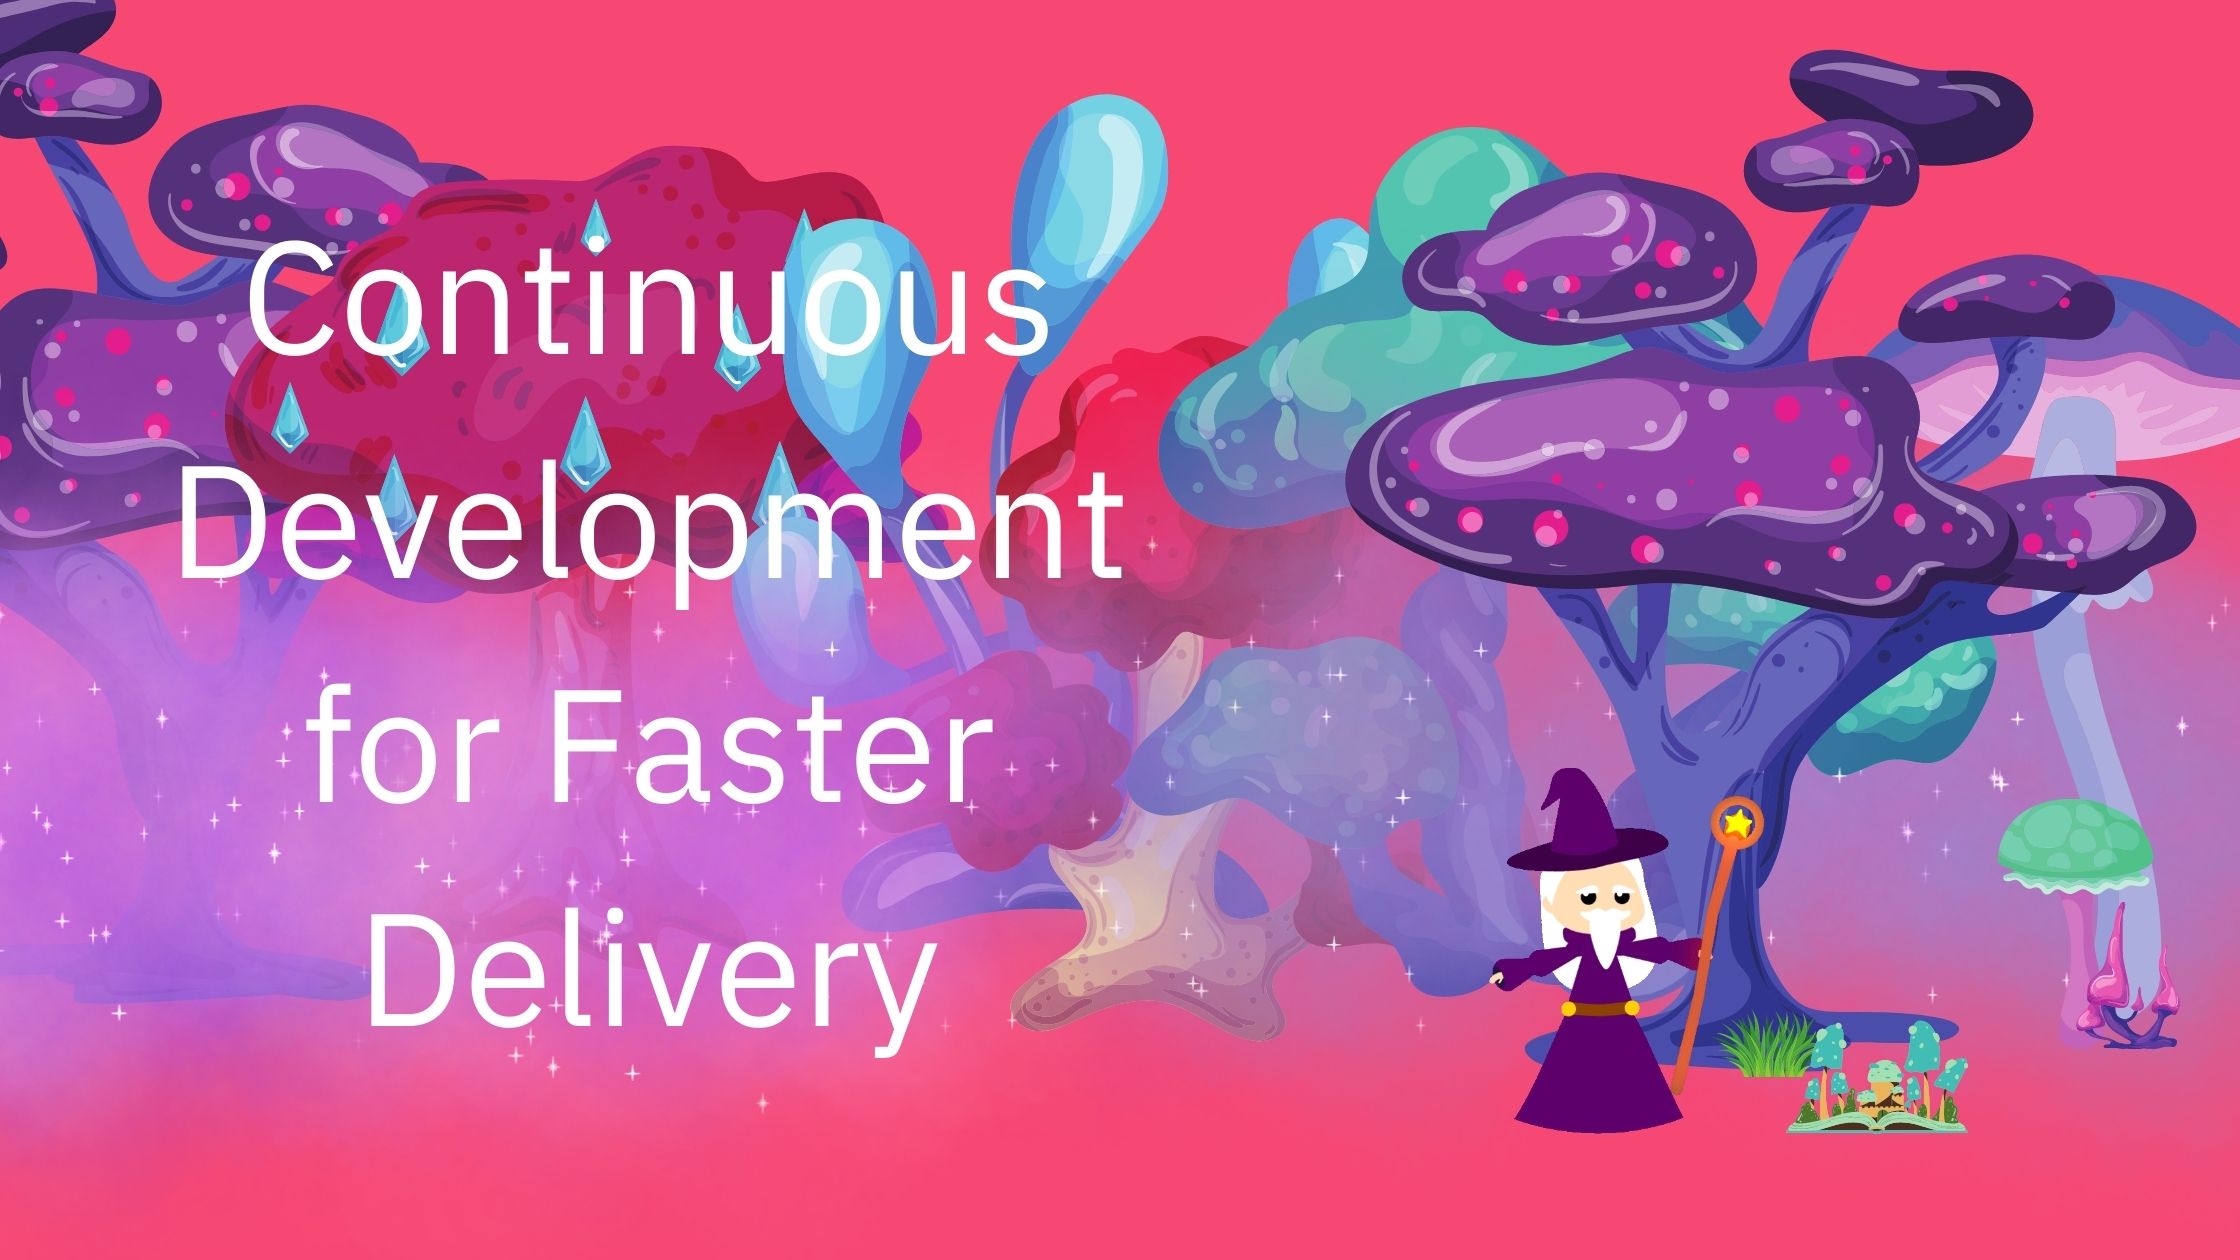 Continuous Development for Faster Delivery